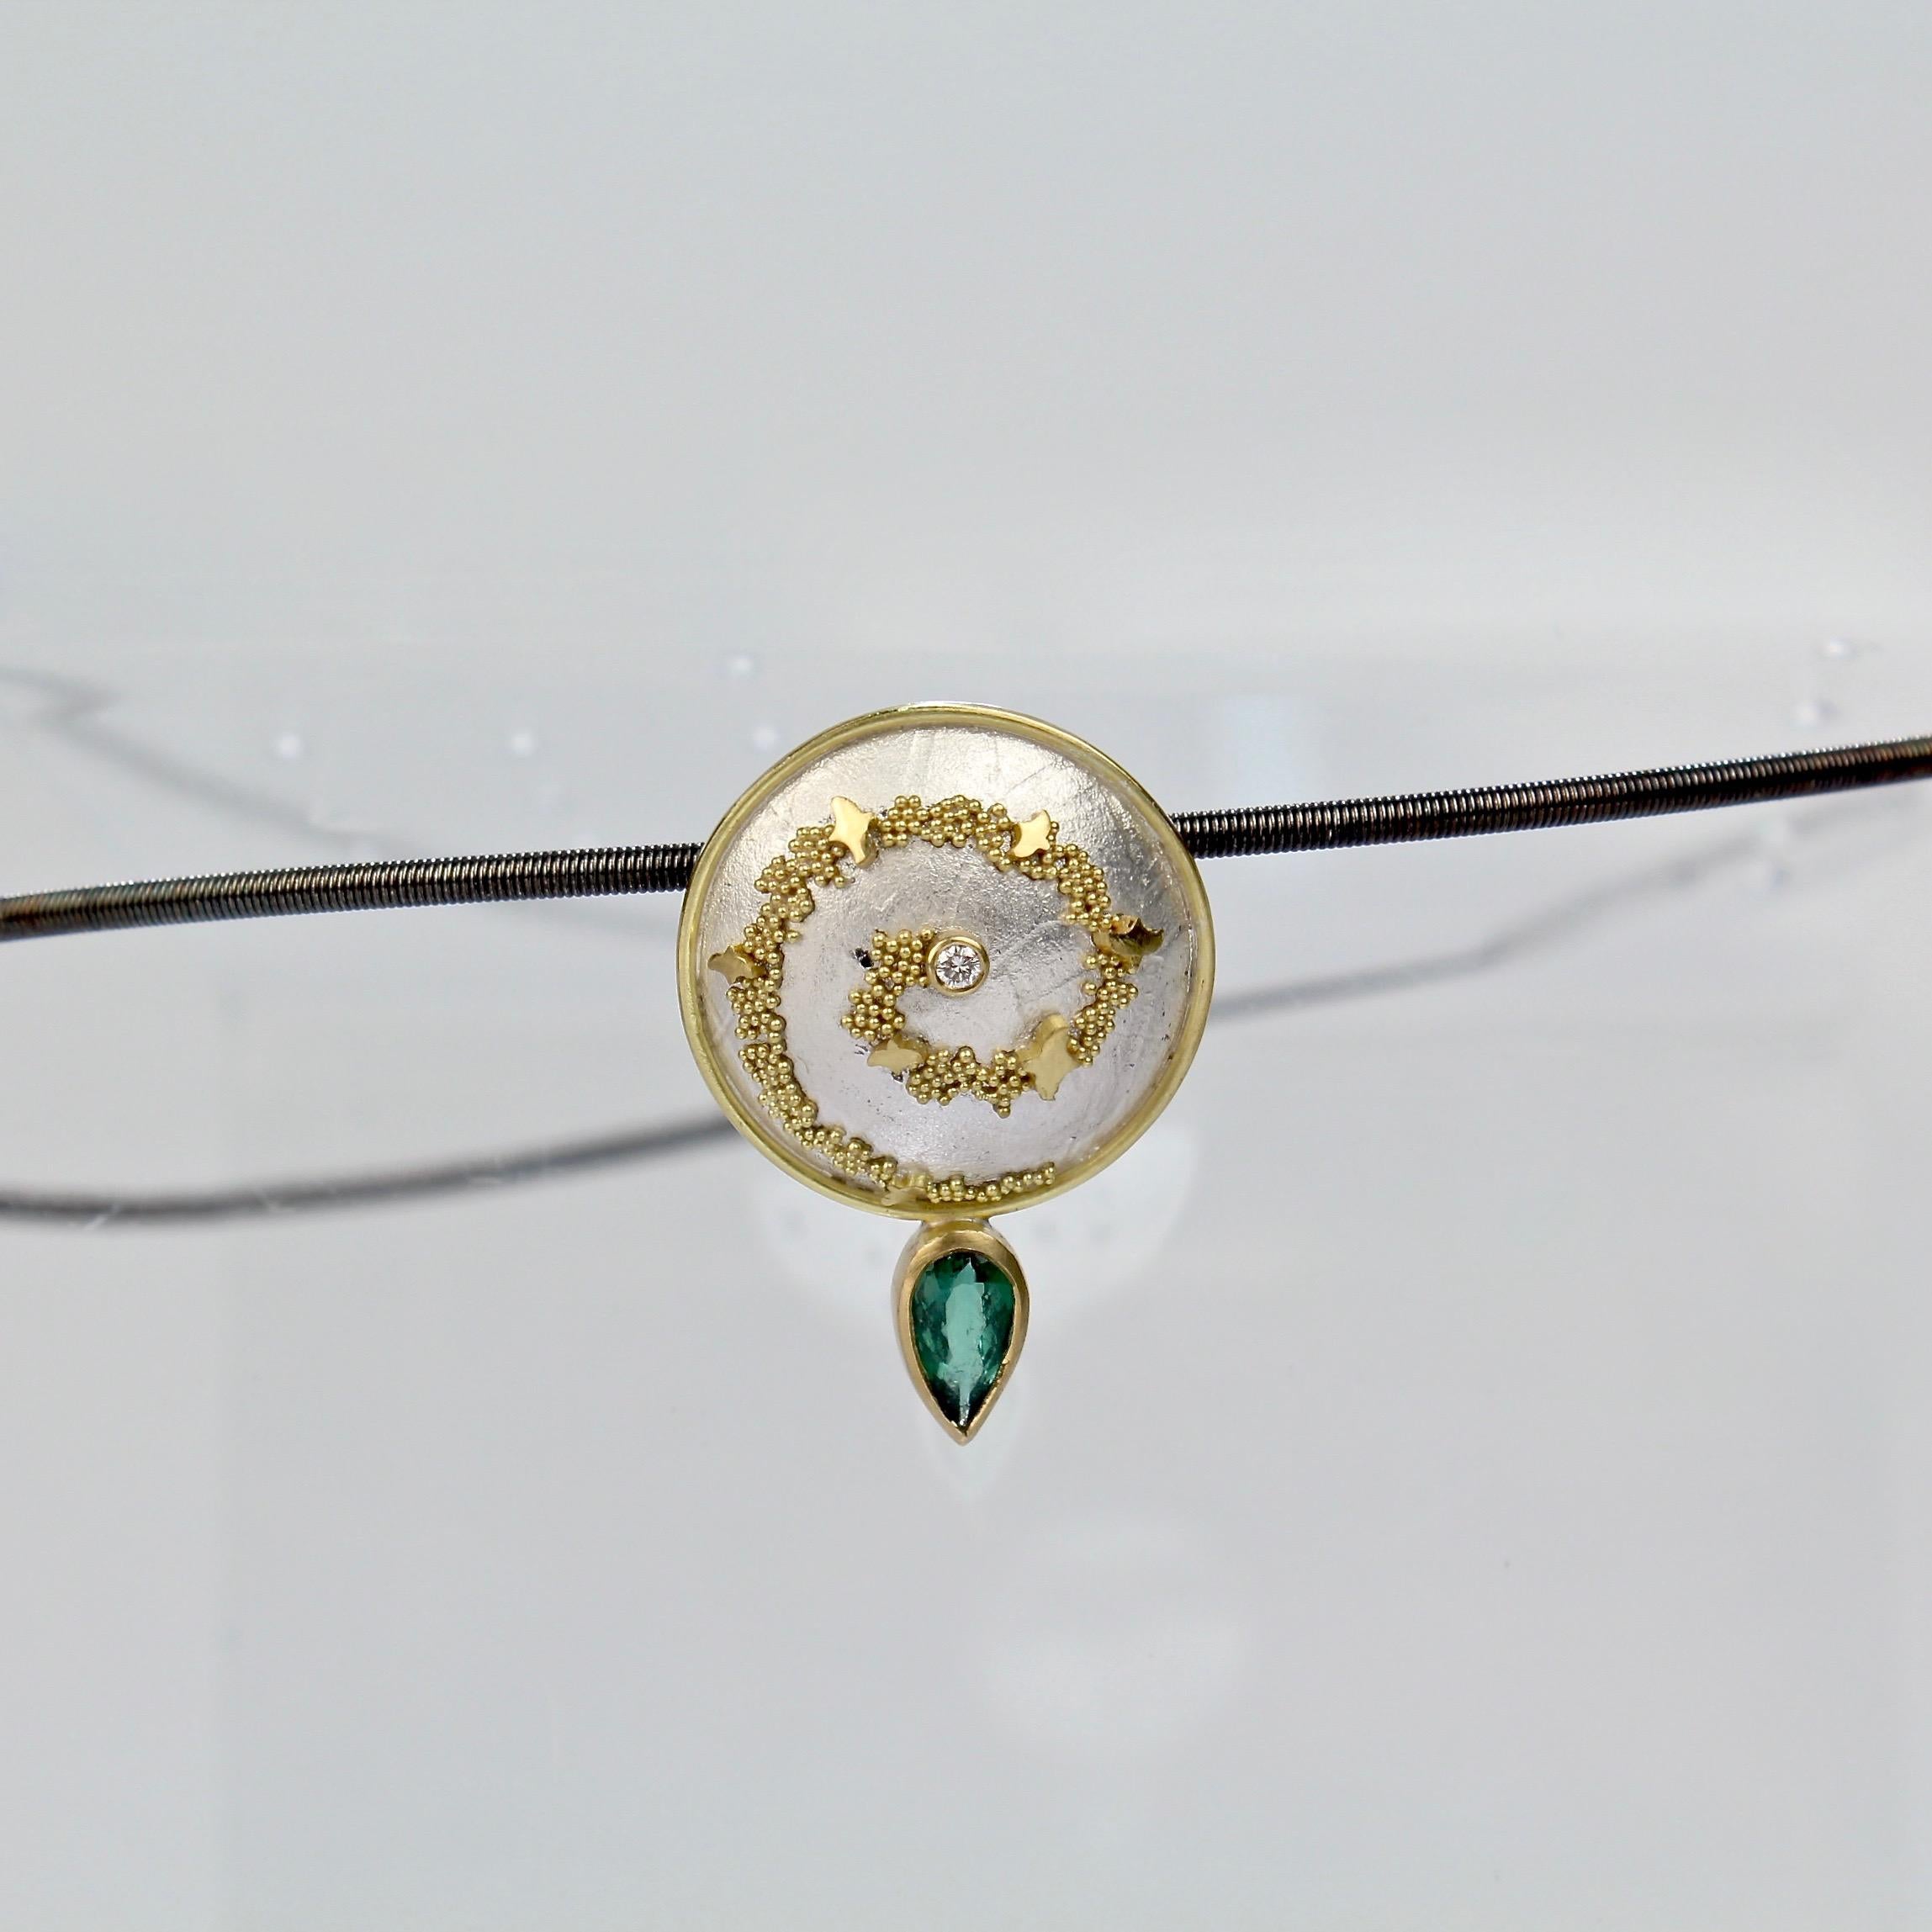 An elegant Cornelia Goldsmith choker necklace.  

The central sterling silver pendant is set with a spiral of high-karat granulated gold beads and a green tourmaline gemstone.  

Goldsmith is a renowned California contemporary jewelry maker and a